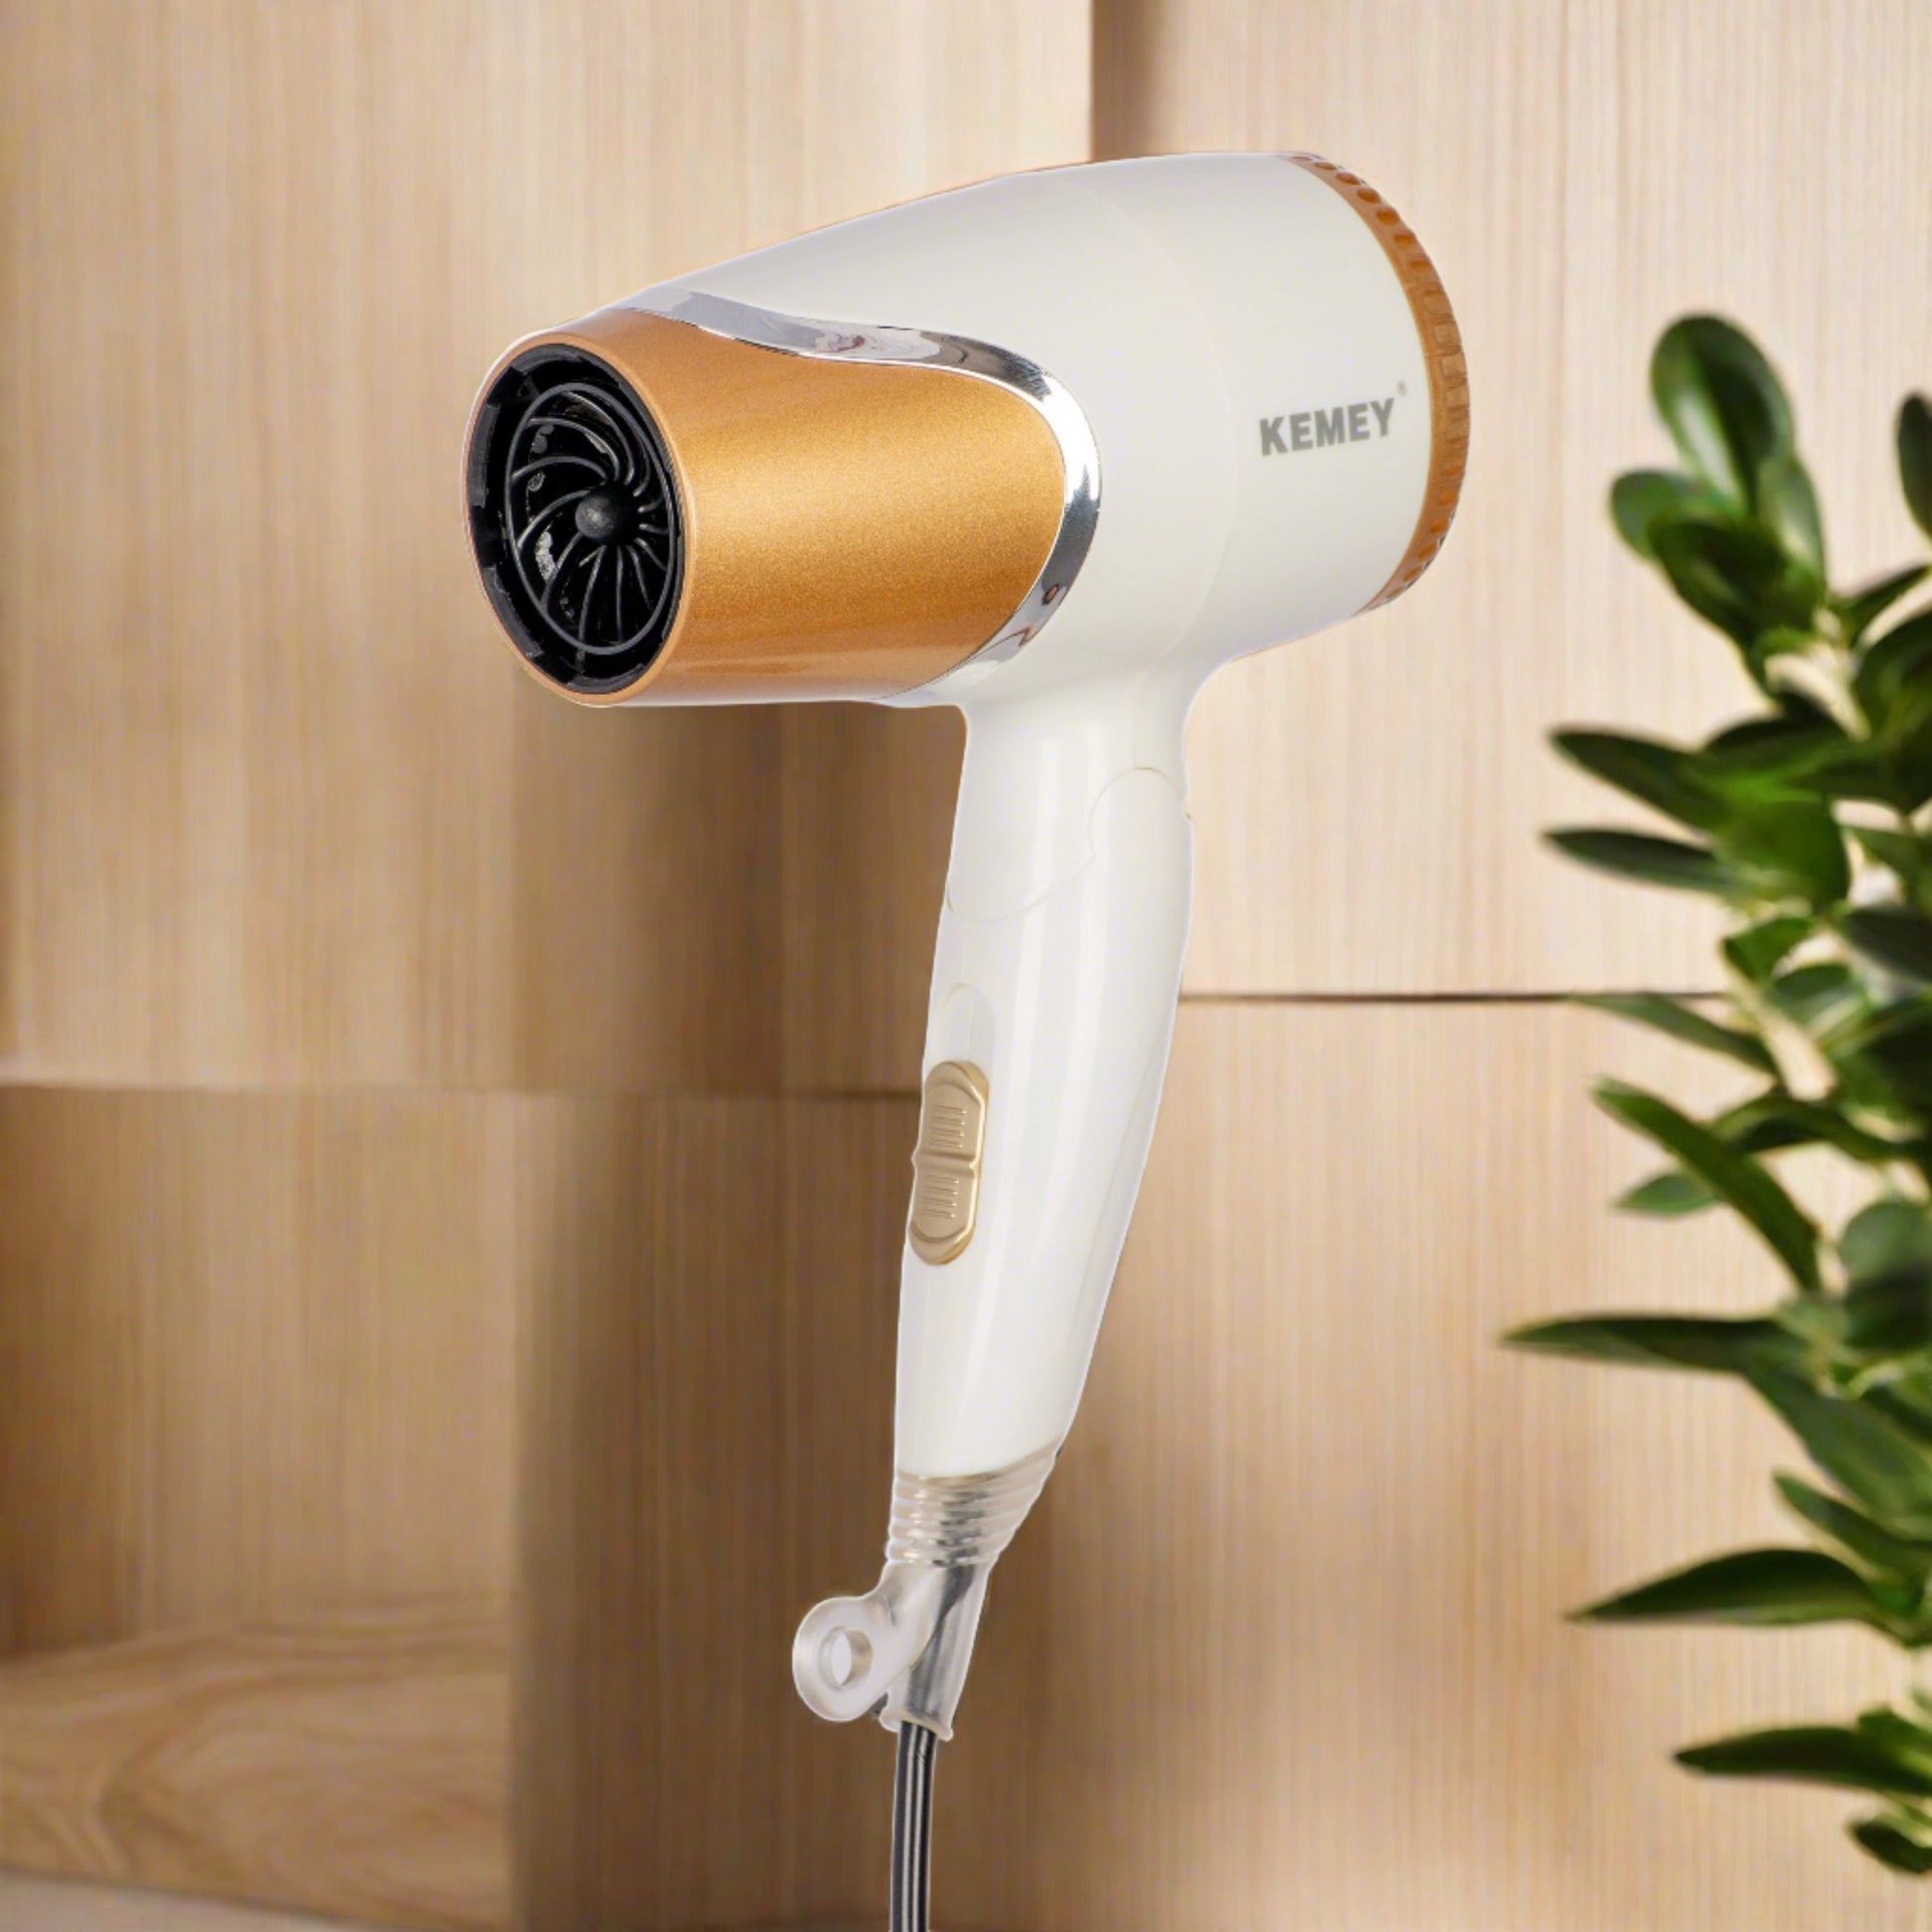 KEMEY KM 6832 Electric Foldable Travel Hair Dryer With 2 Speed Control Zaappy